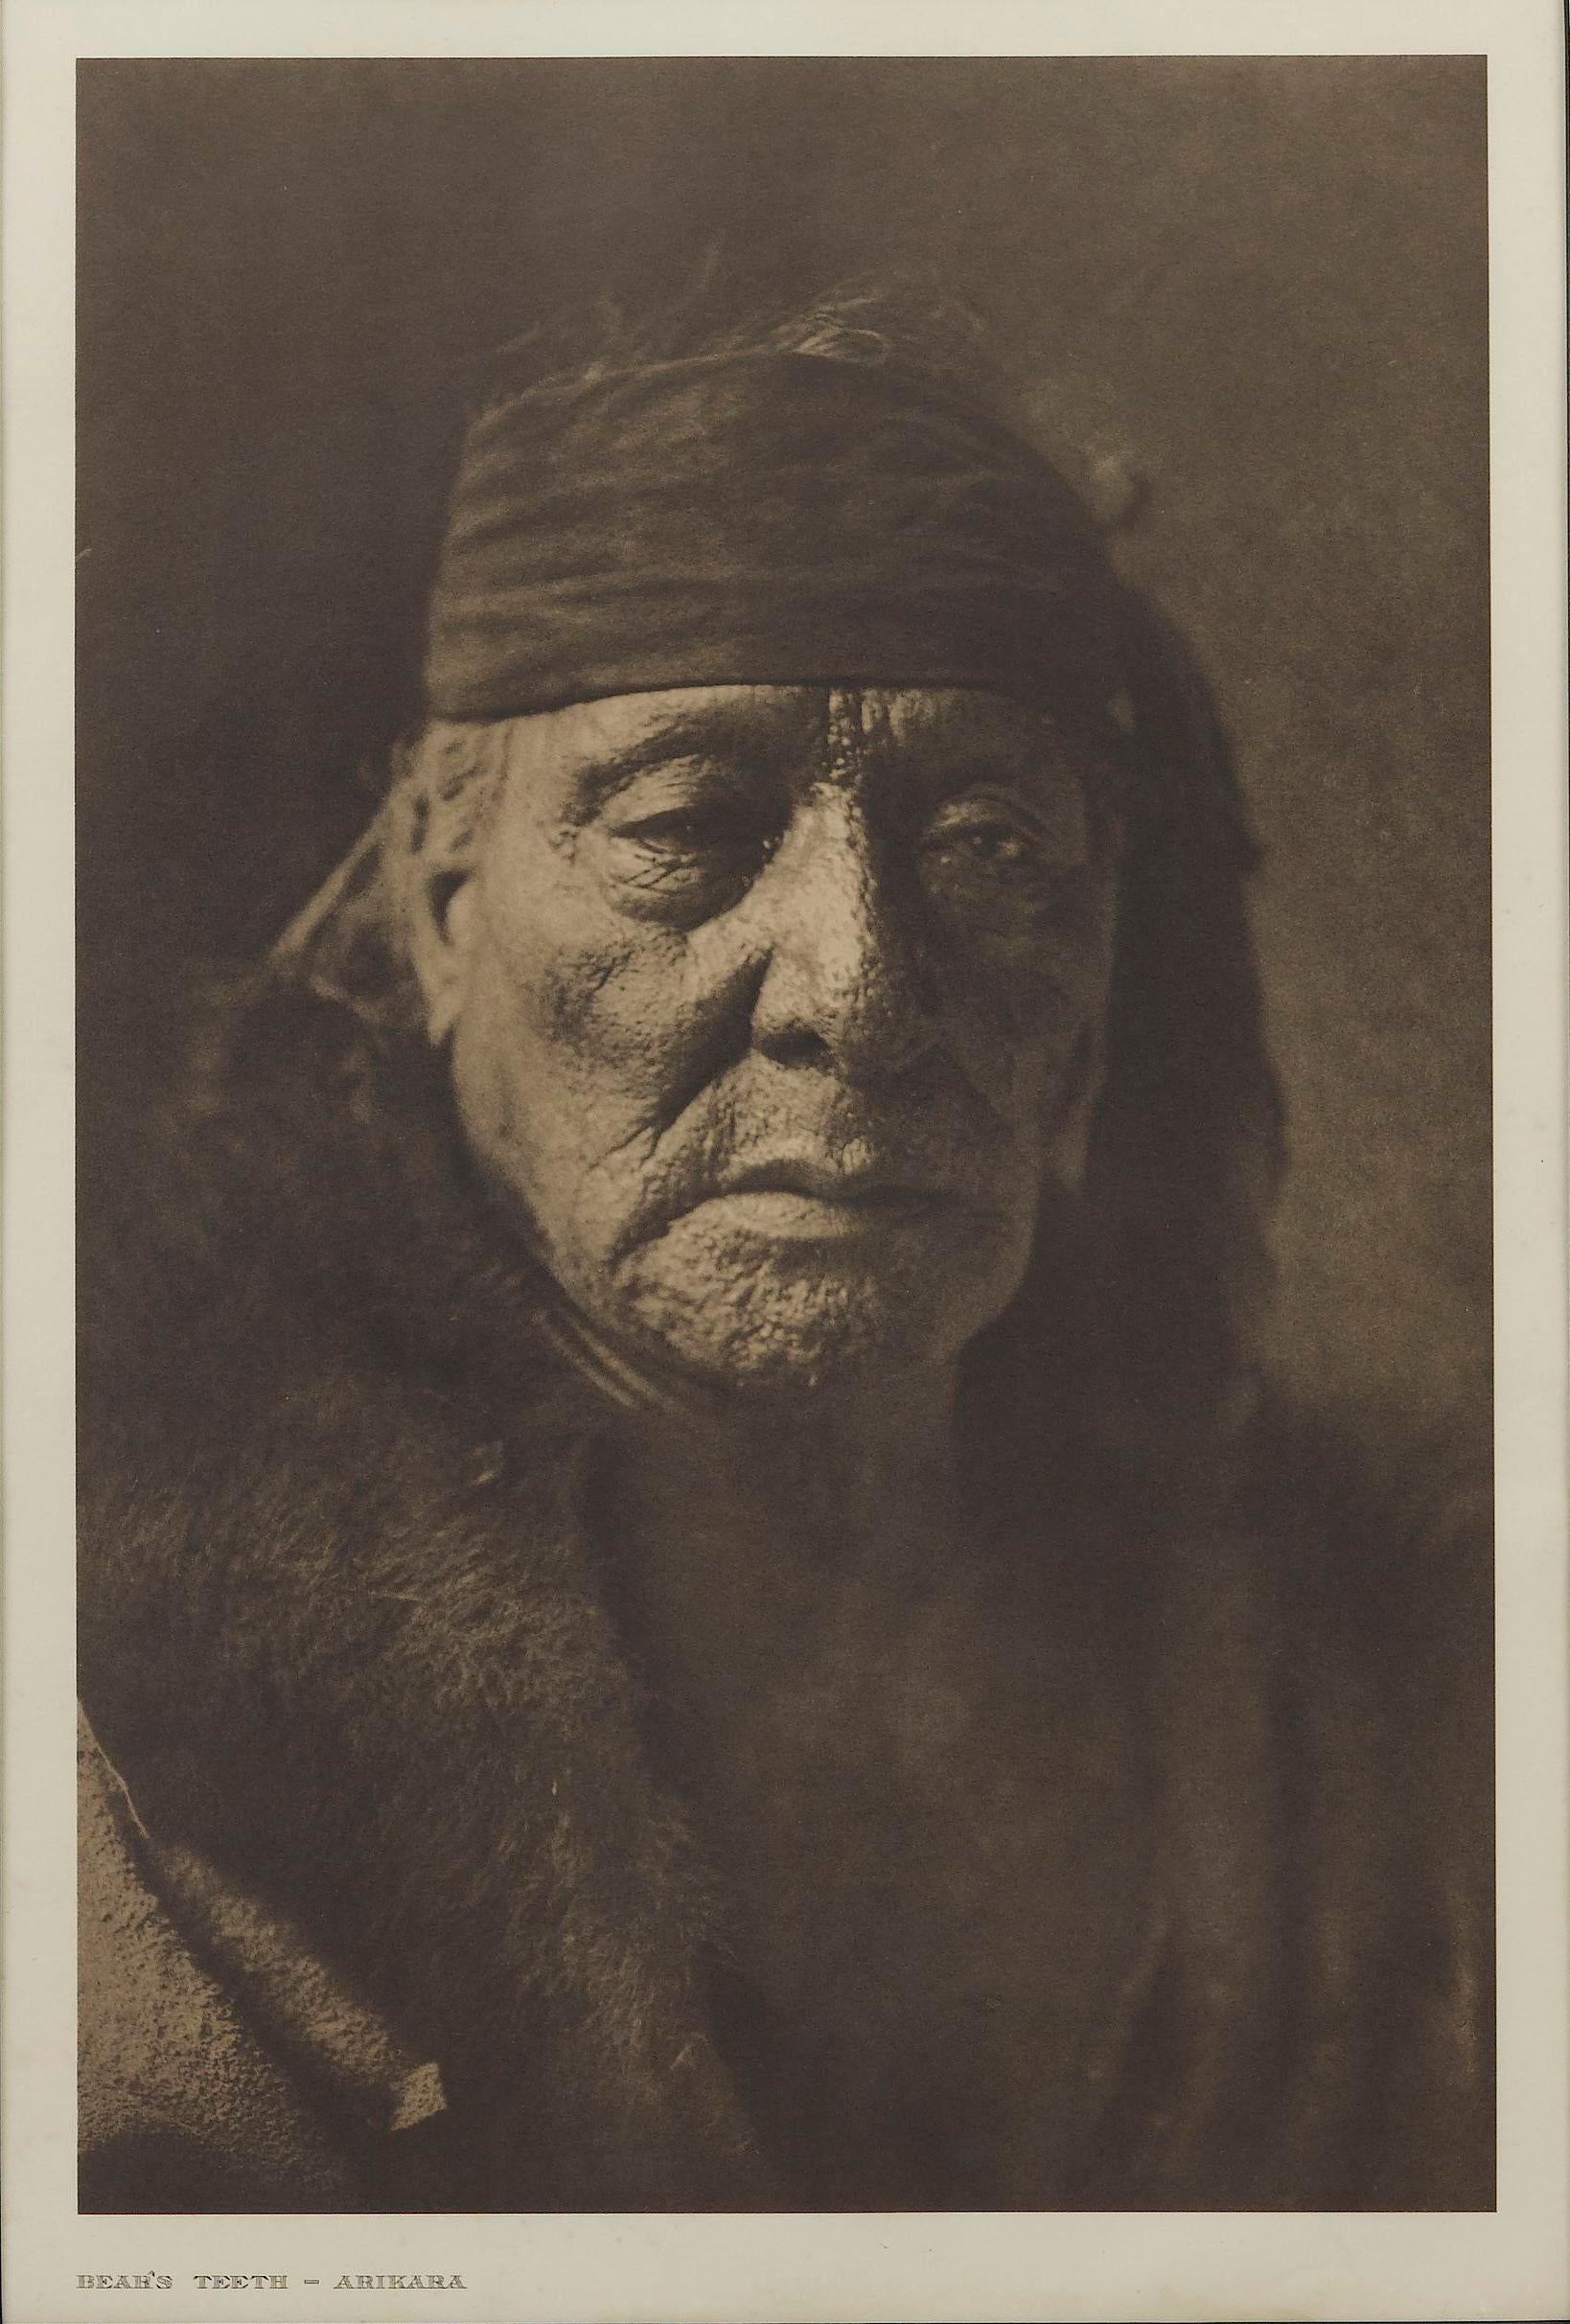 Presented is a fine photogravure portrait of Bear’s Teeth of the Arikara tribe by Edward Curtis. The image is Plate 154 from Supplementary Portfolio 5 of Edward Curtis' epic project The North American Indian. The caption, written by Curtis, for this